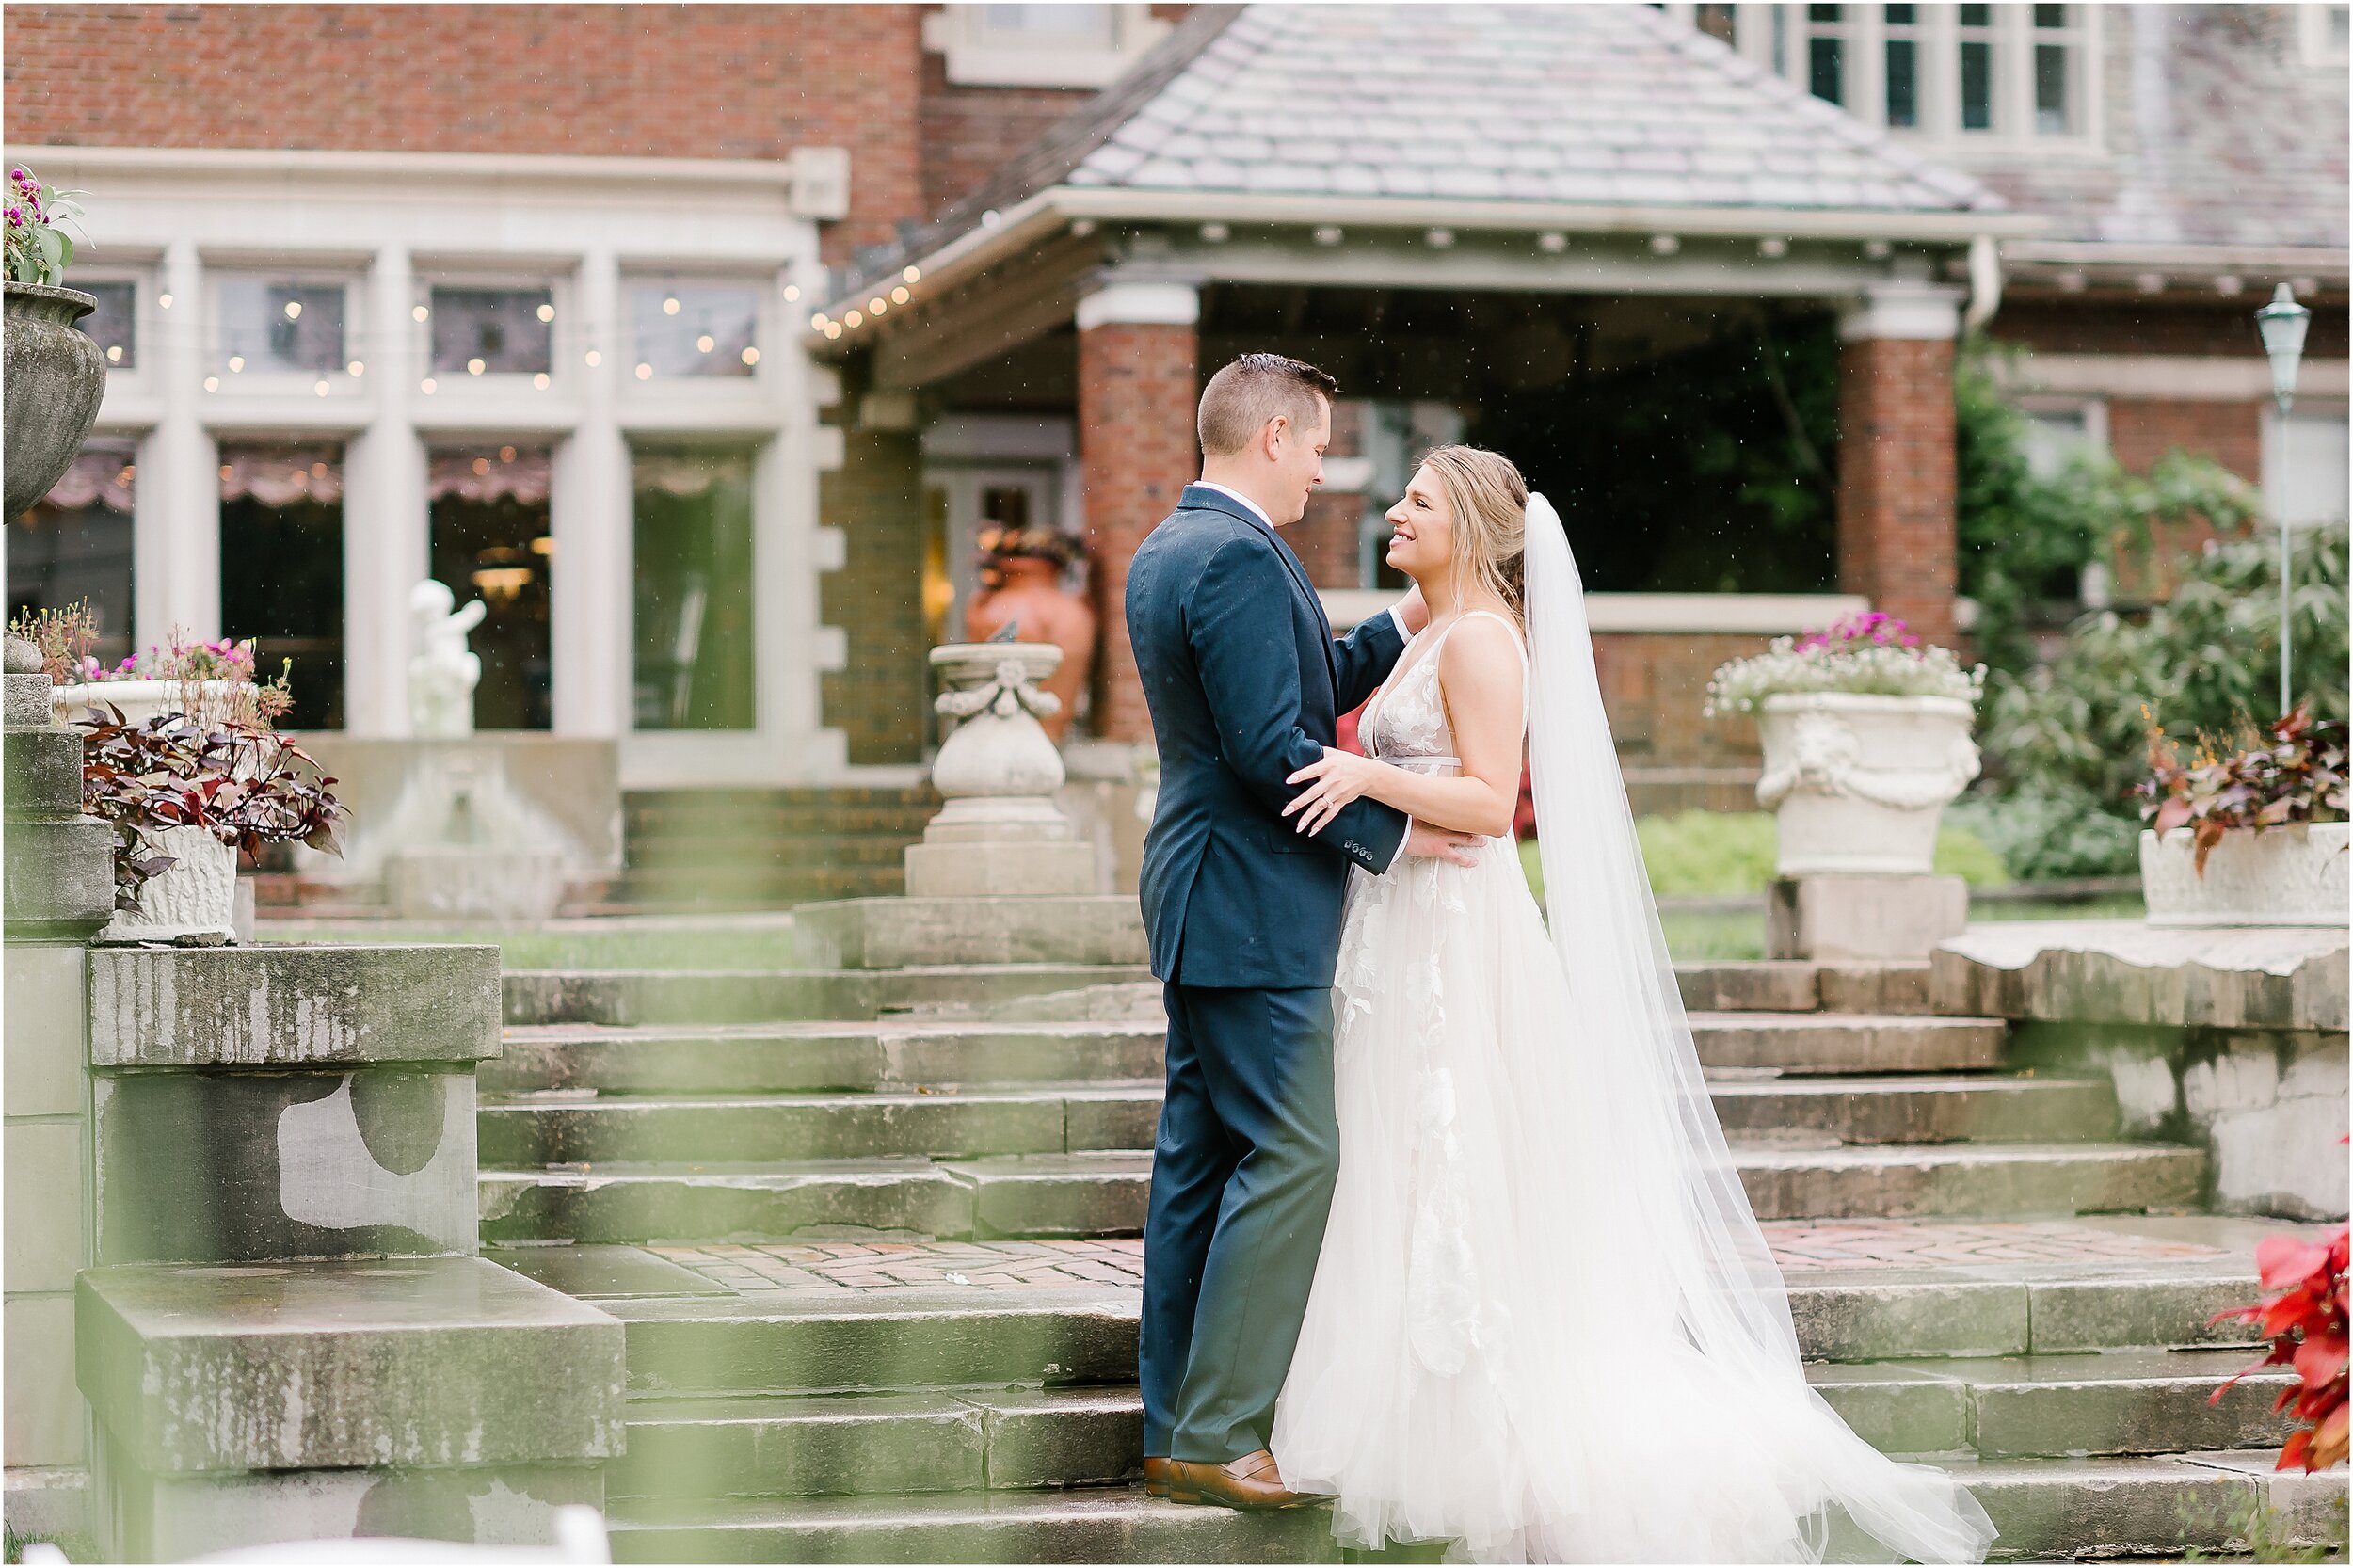 Rebecca Shehorn Photography Colleen and Kyle Inn at Irwin Gardens Wedding-723_The Commons Columbus Inn at Irwin Garden Indianapolis Wedding Photographer.jpg